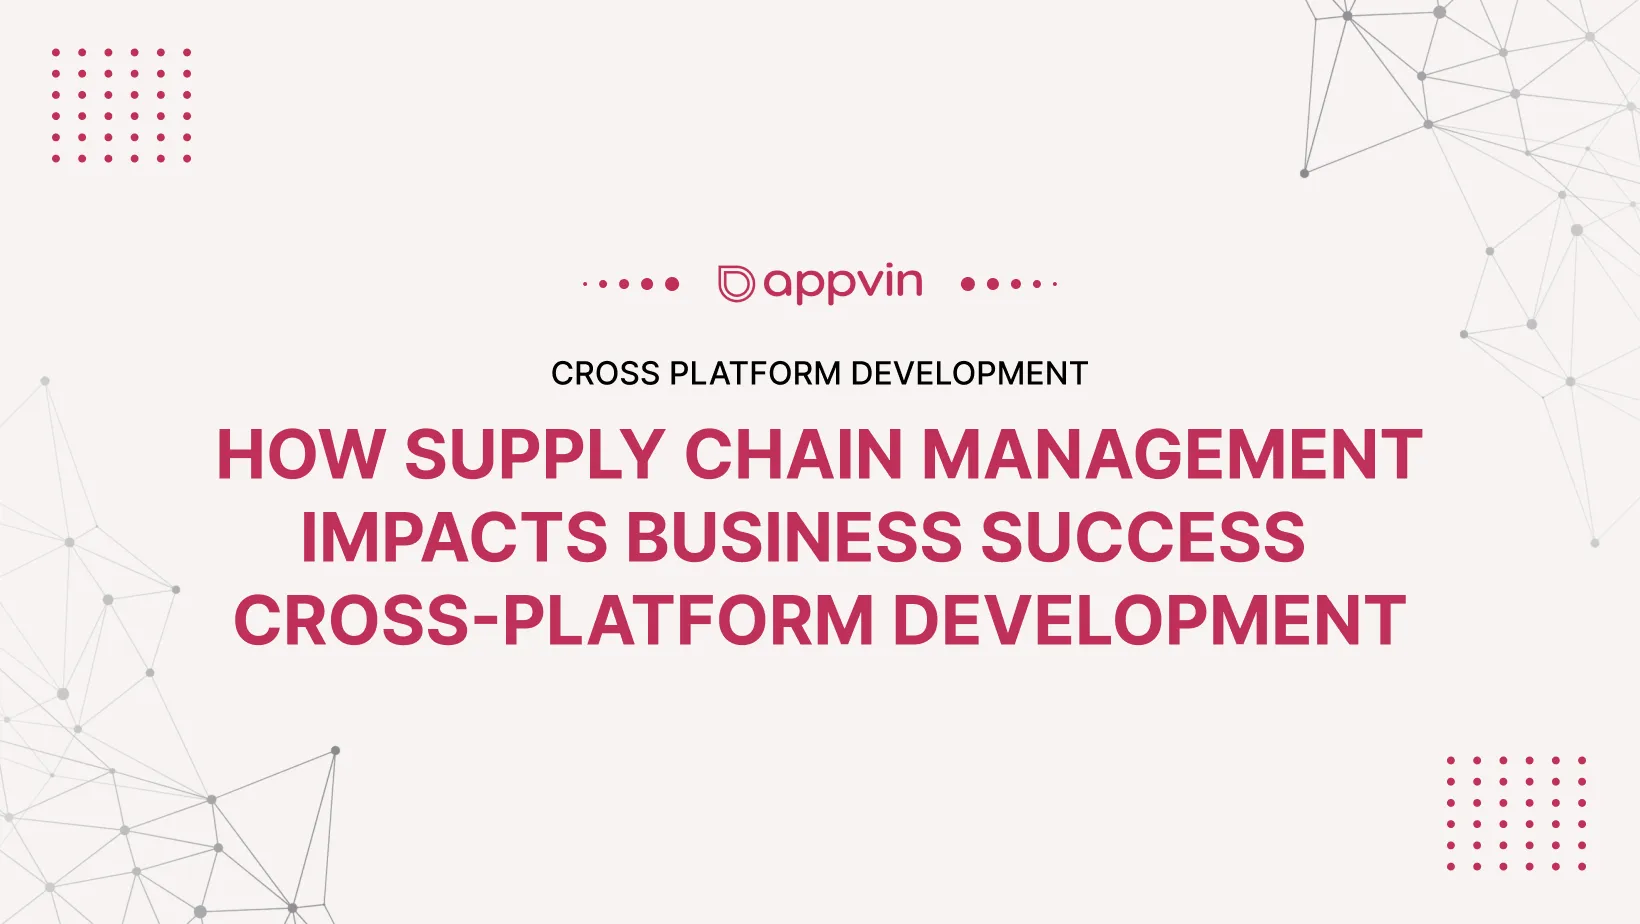 How supply chain management impacts business success